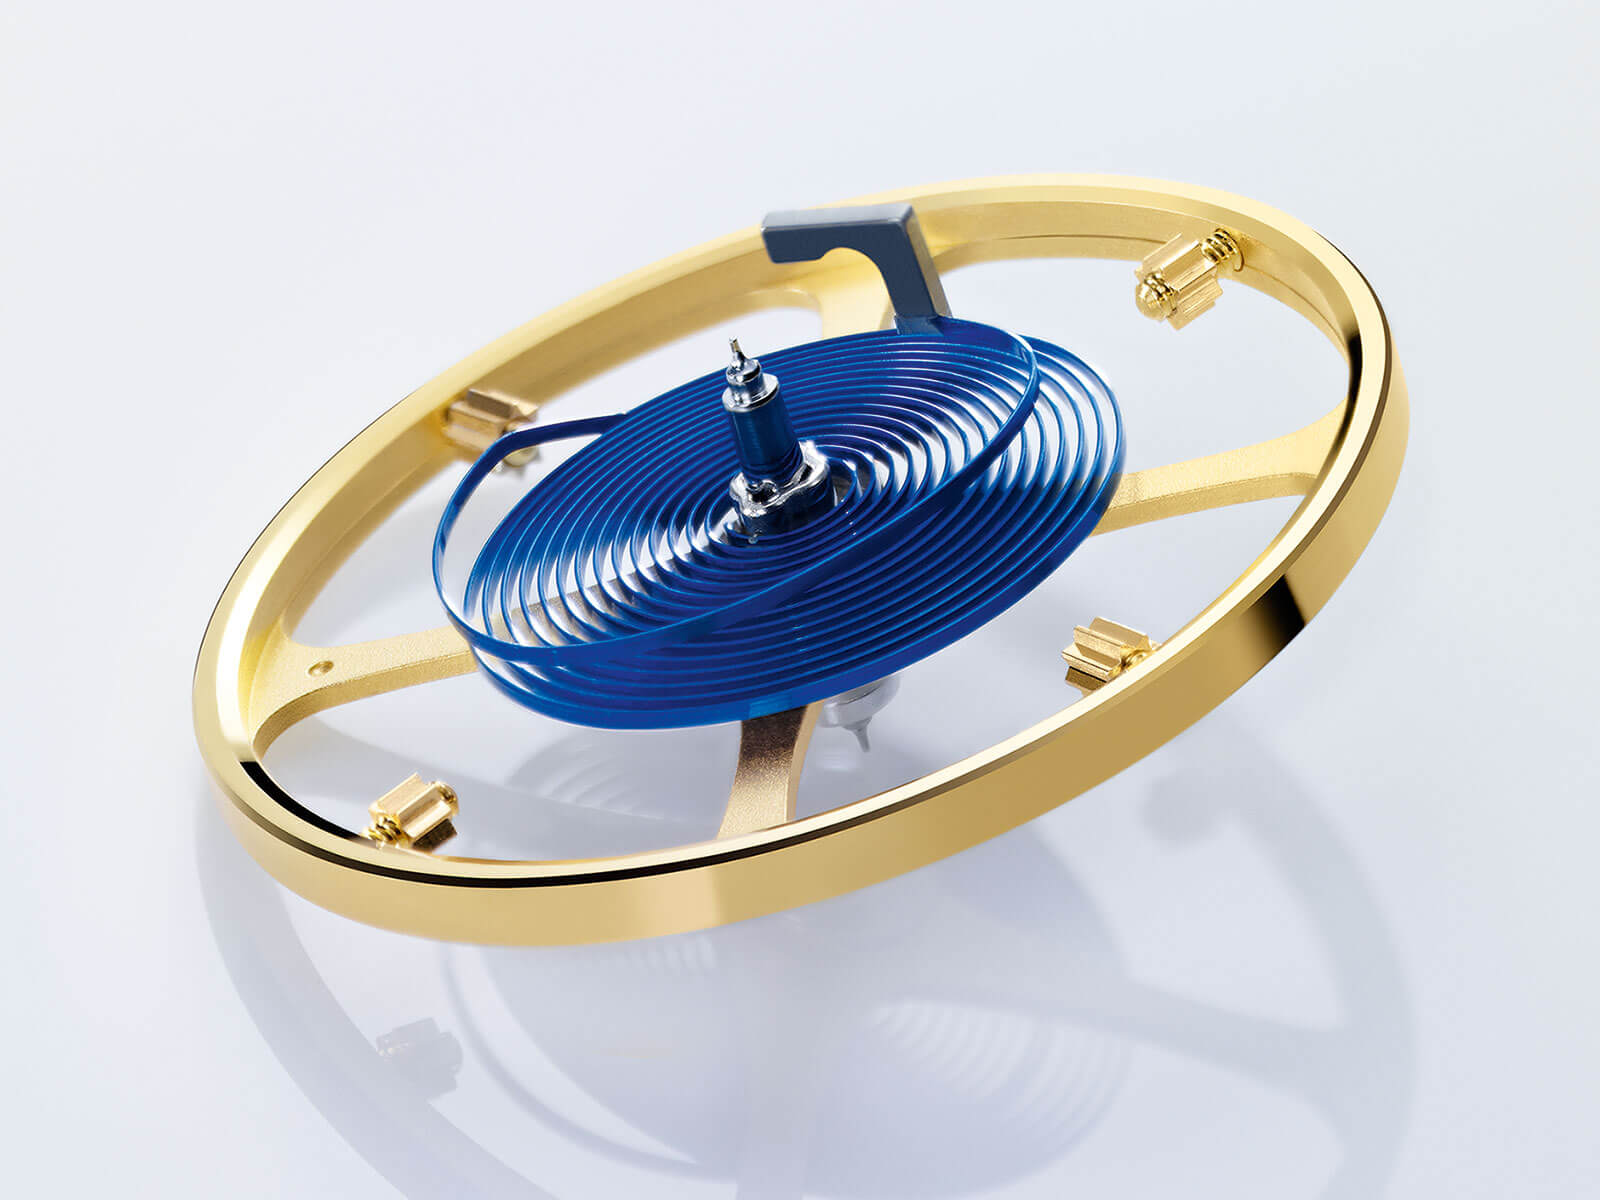 How much do you know about the Rolex Parachrom Hairspring?